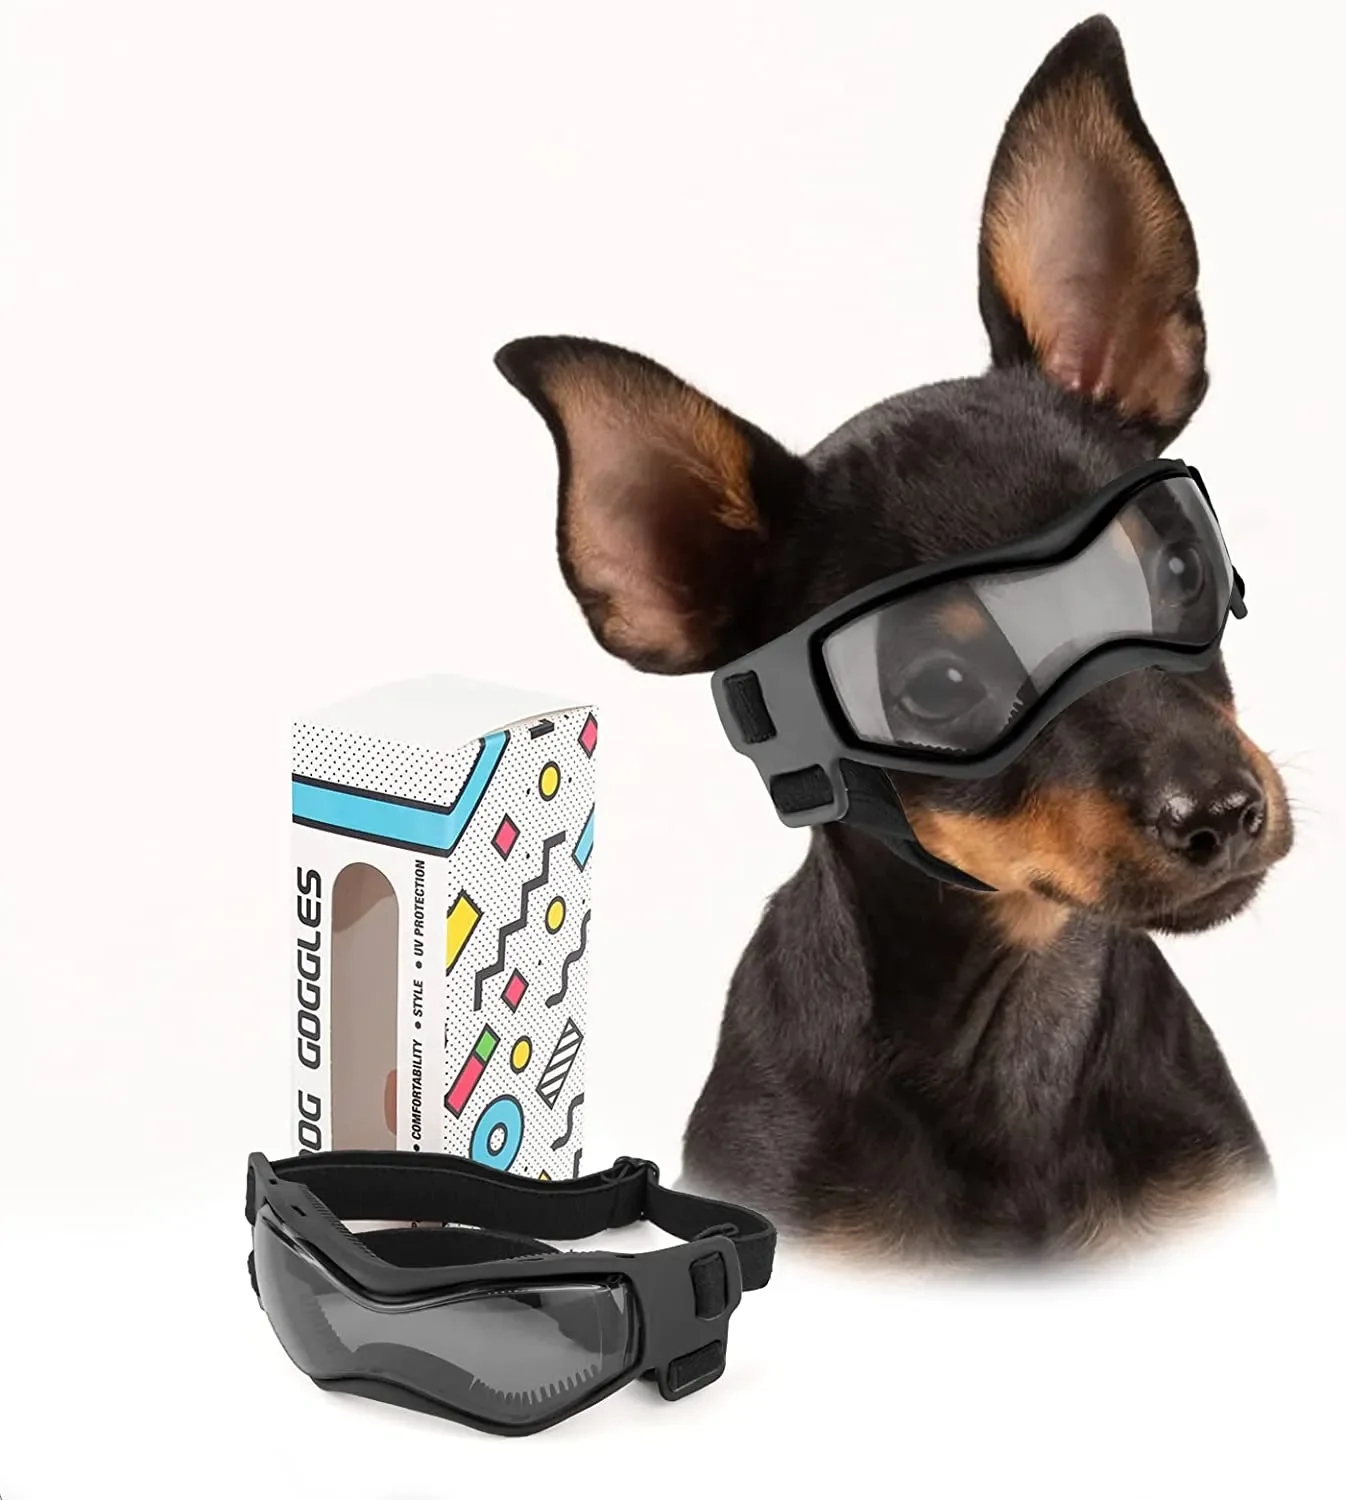 

UV Protective Goggles for Dogs Cat Sunglasses Cool Protection Eyewear for Small Medium Dogs Outdoor Riding Pets Accessorie